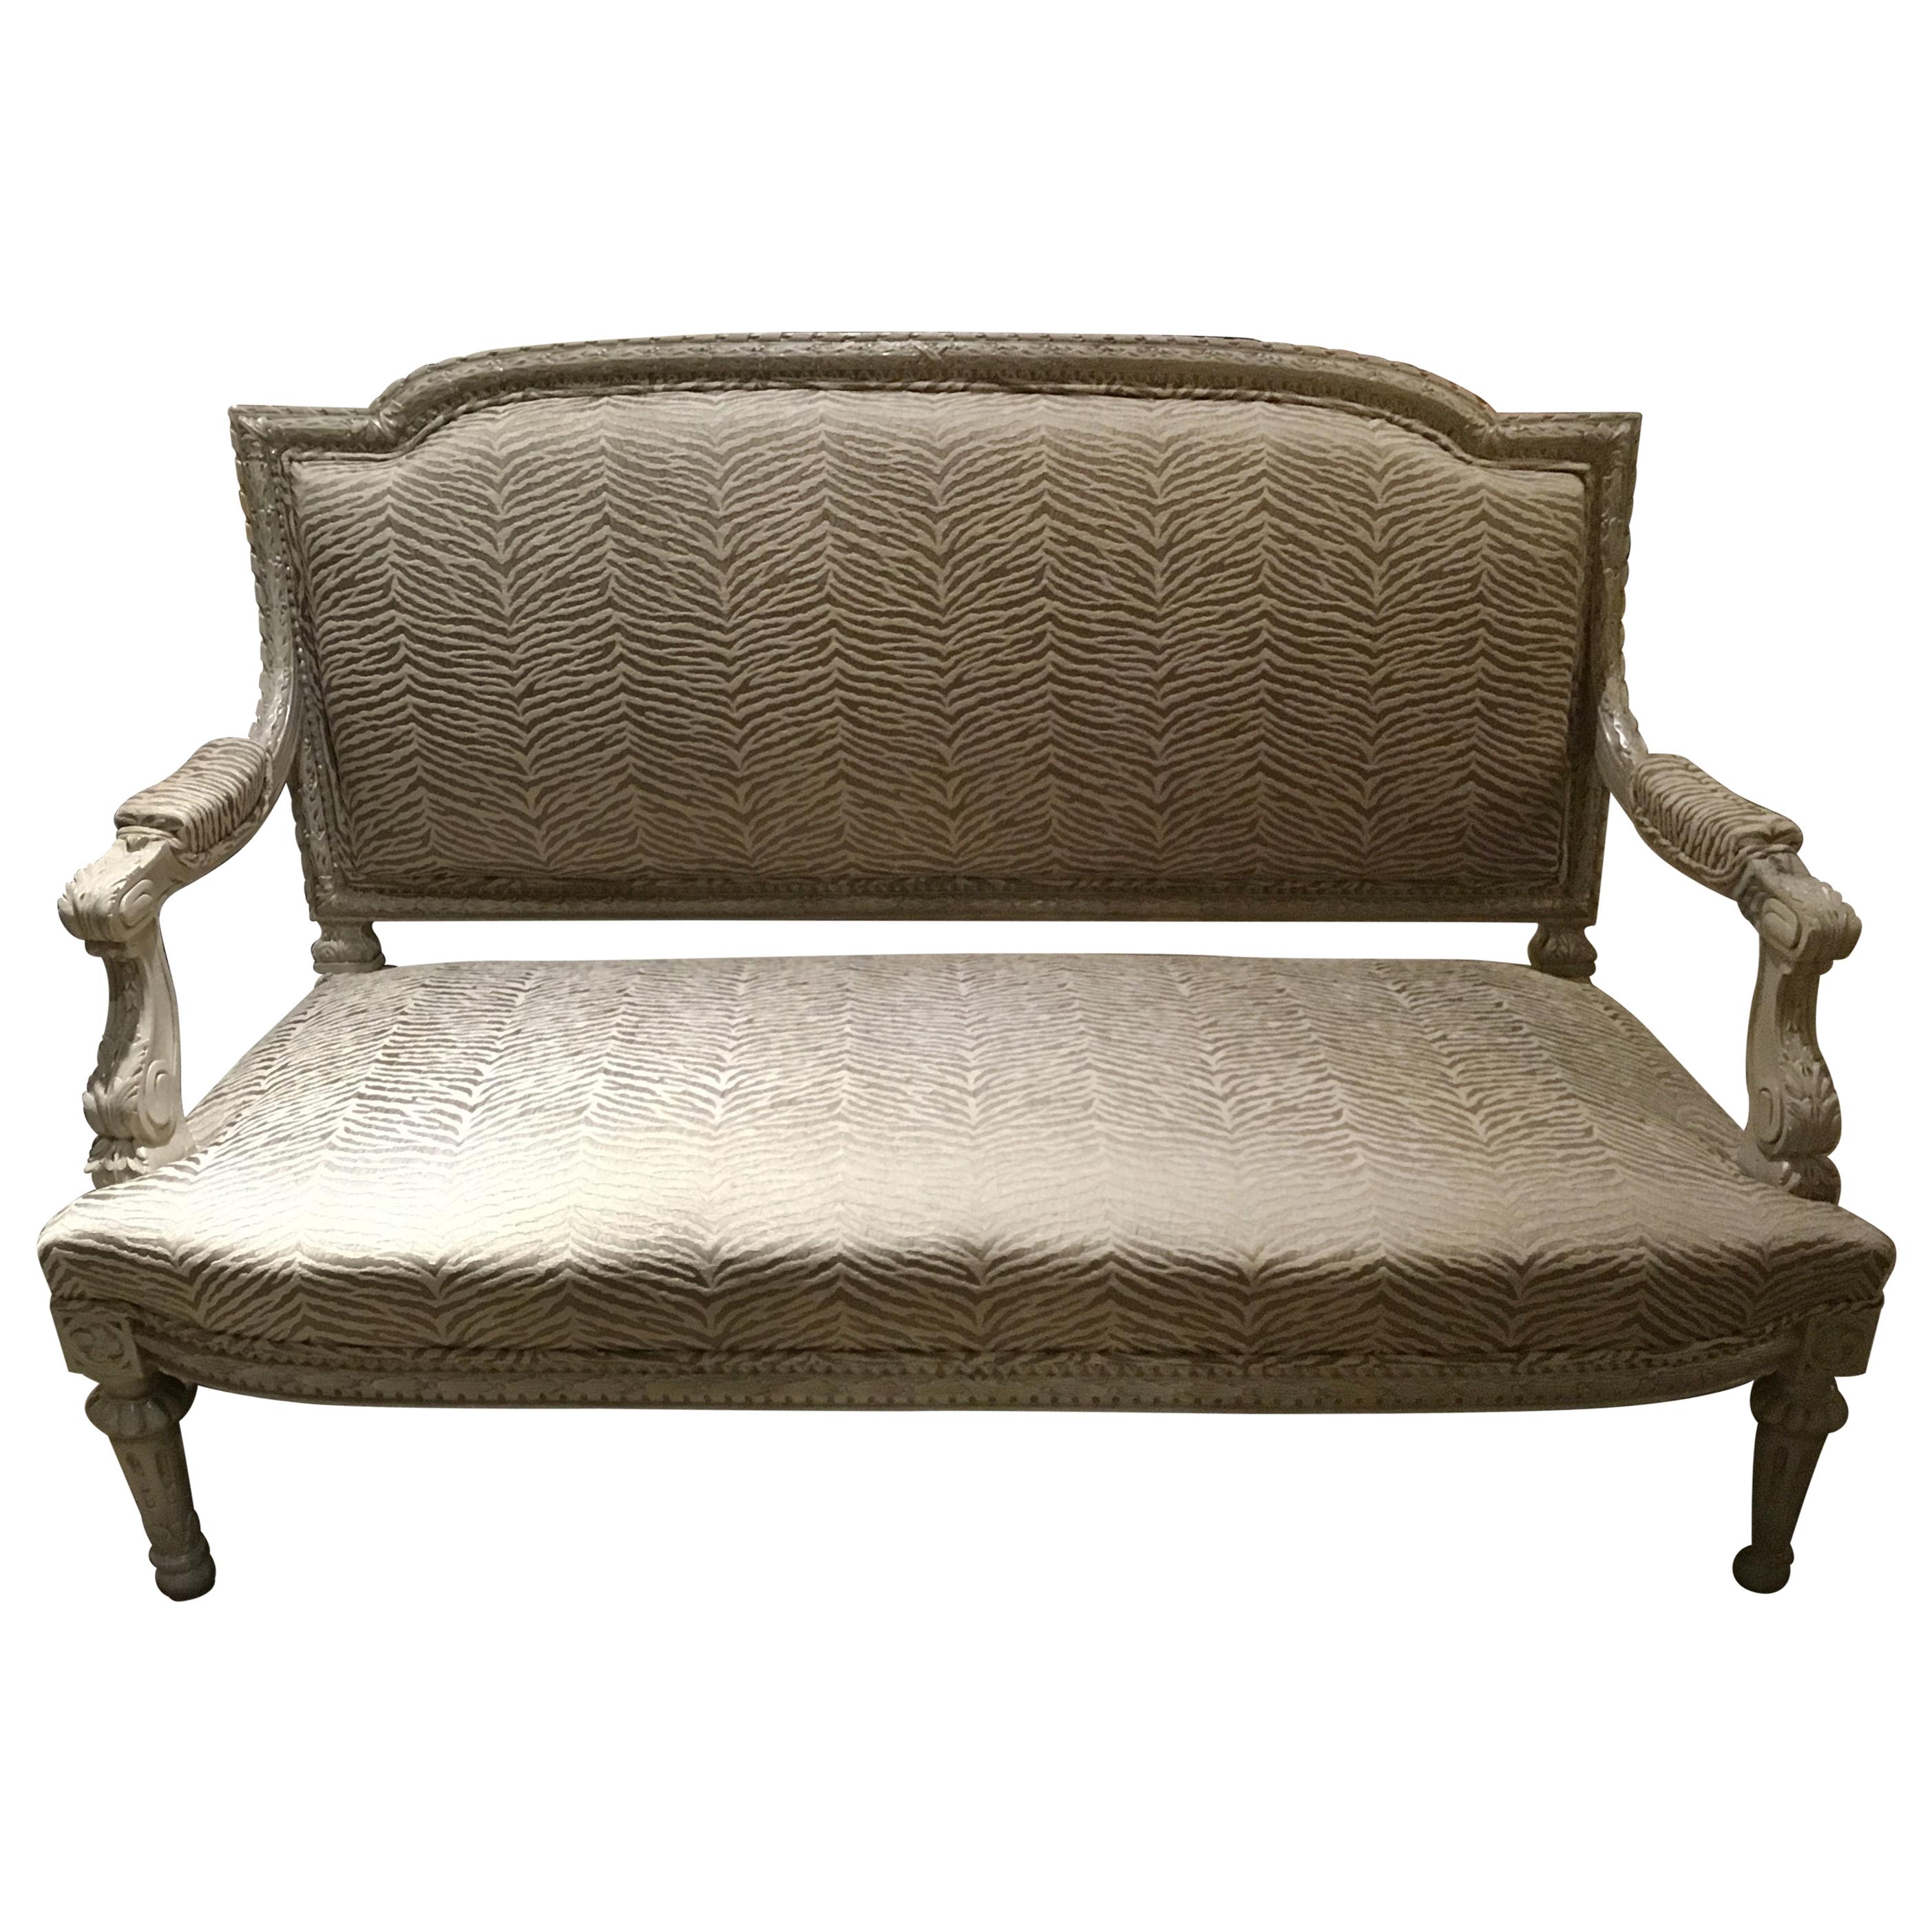 Louis XVI-Style Settee or Loveseat Polychromed with New Upholstery, 19th Century For Sale